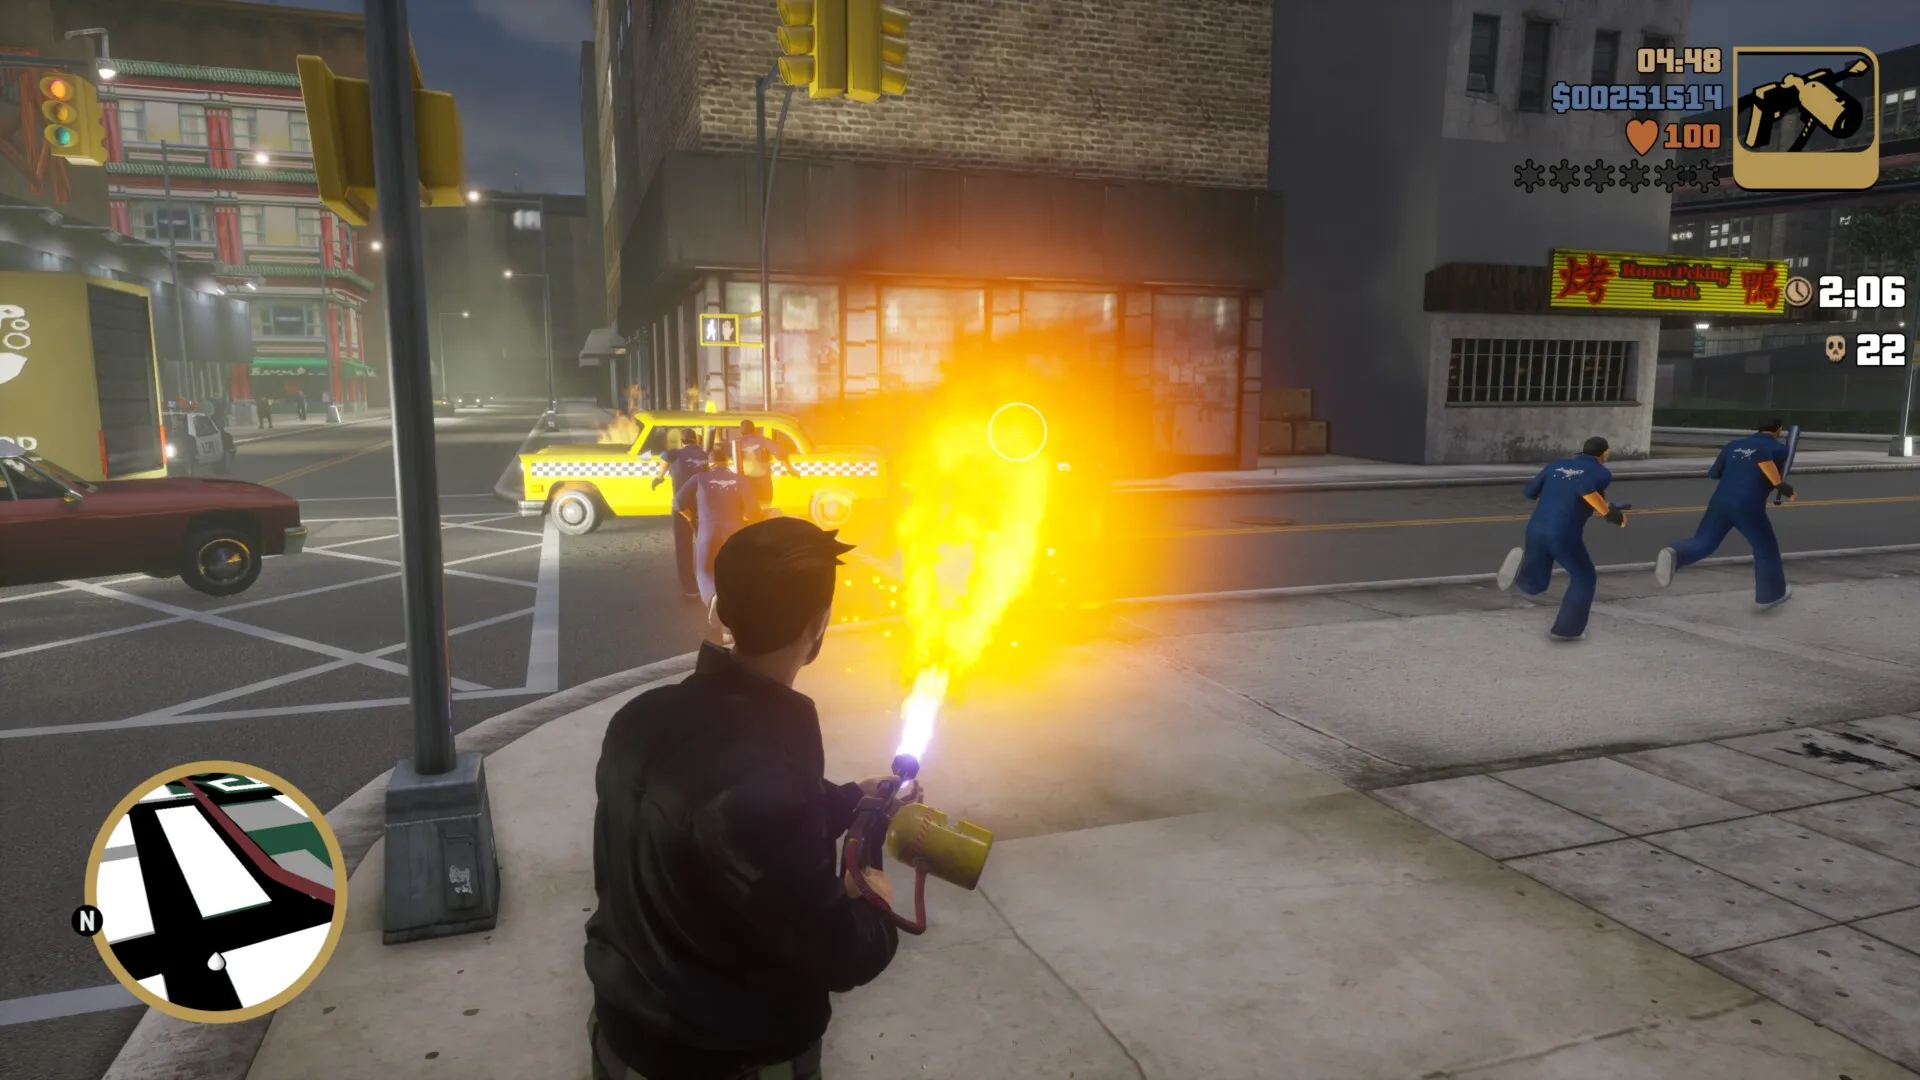 GTA Trilogy PC fixes - How to change three glaring issues